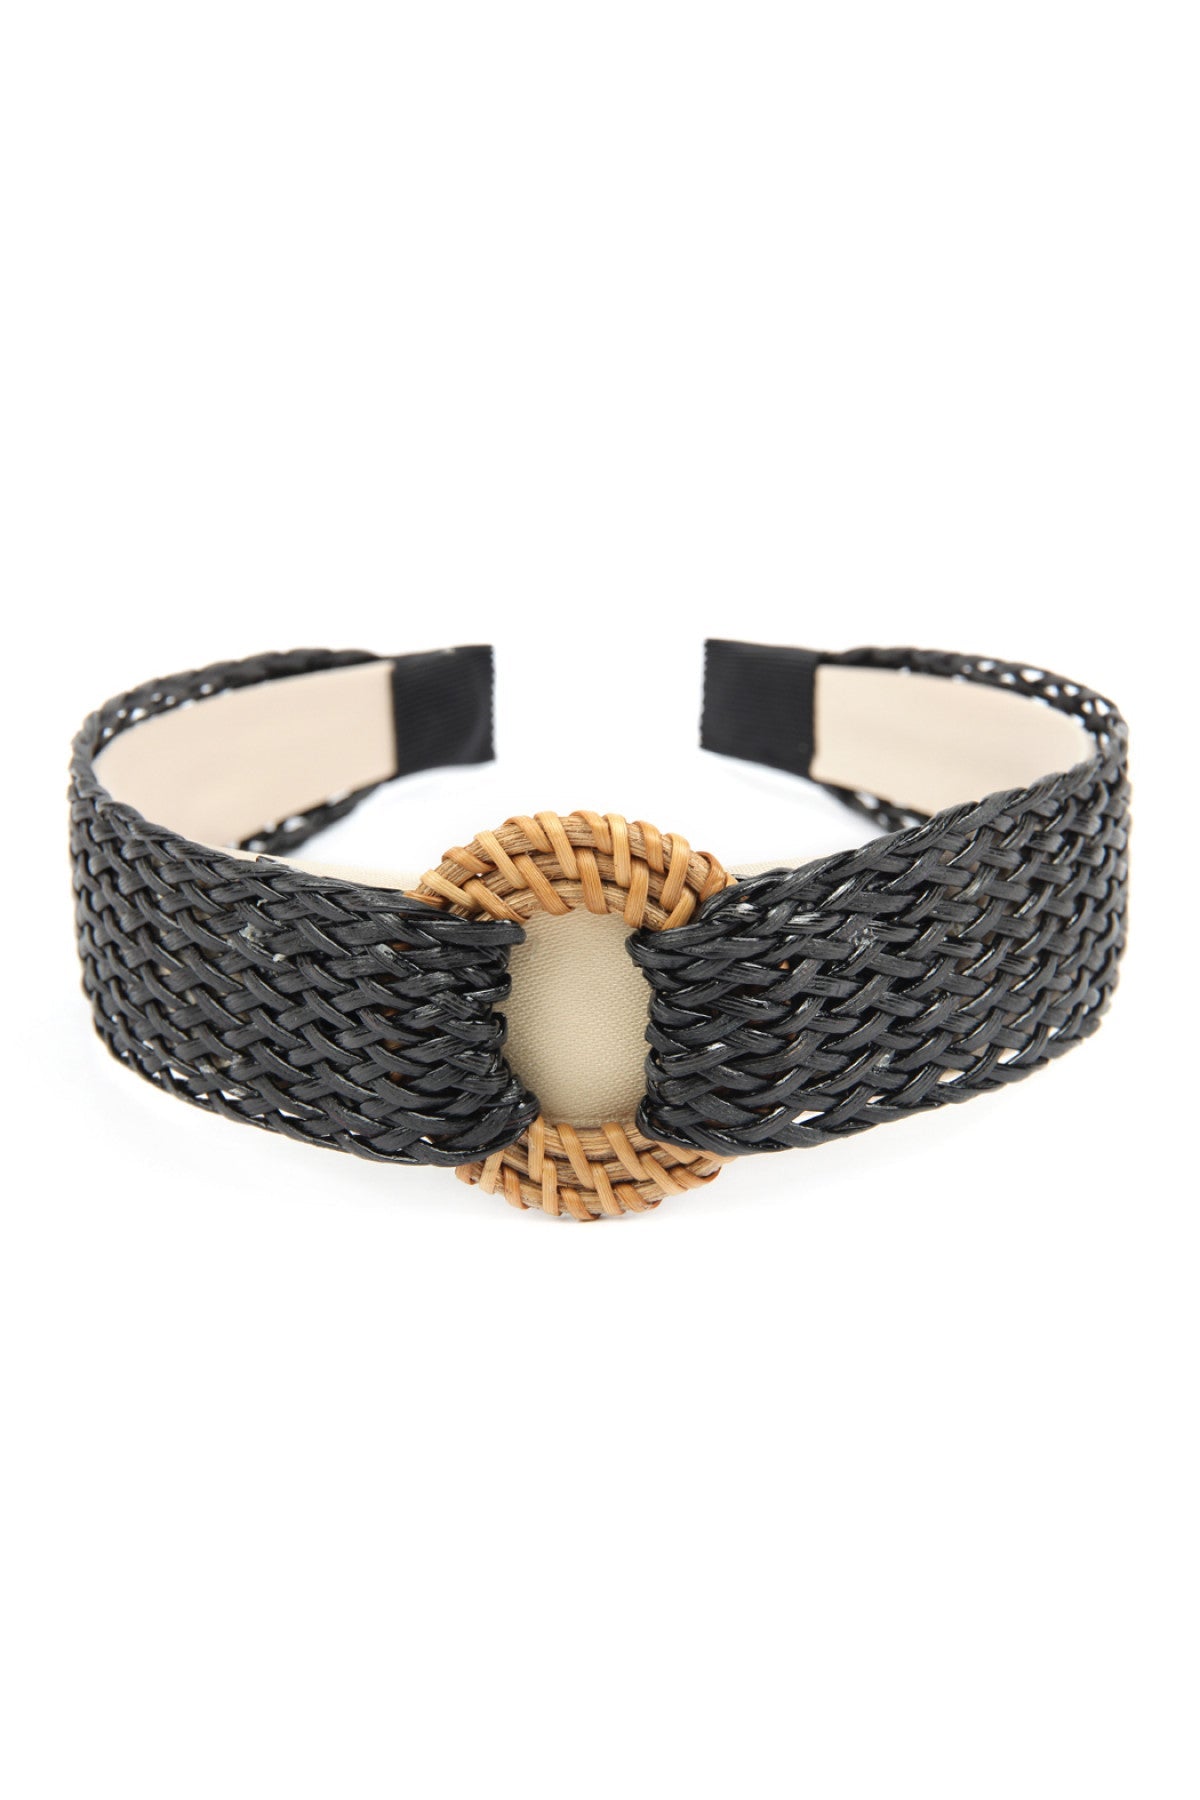 WEAVED FIBER WITH DISC WEAVED RAFFIA HEADBAND/6PCS (NOW $2.50 ONLY!)